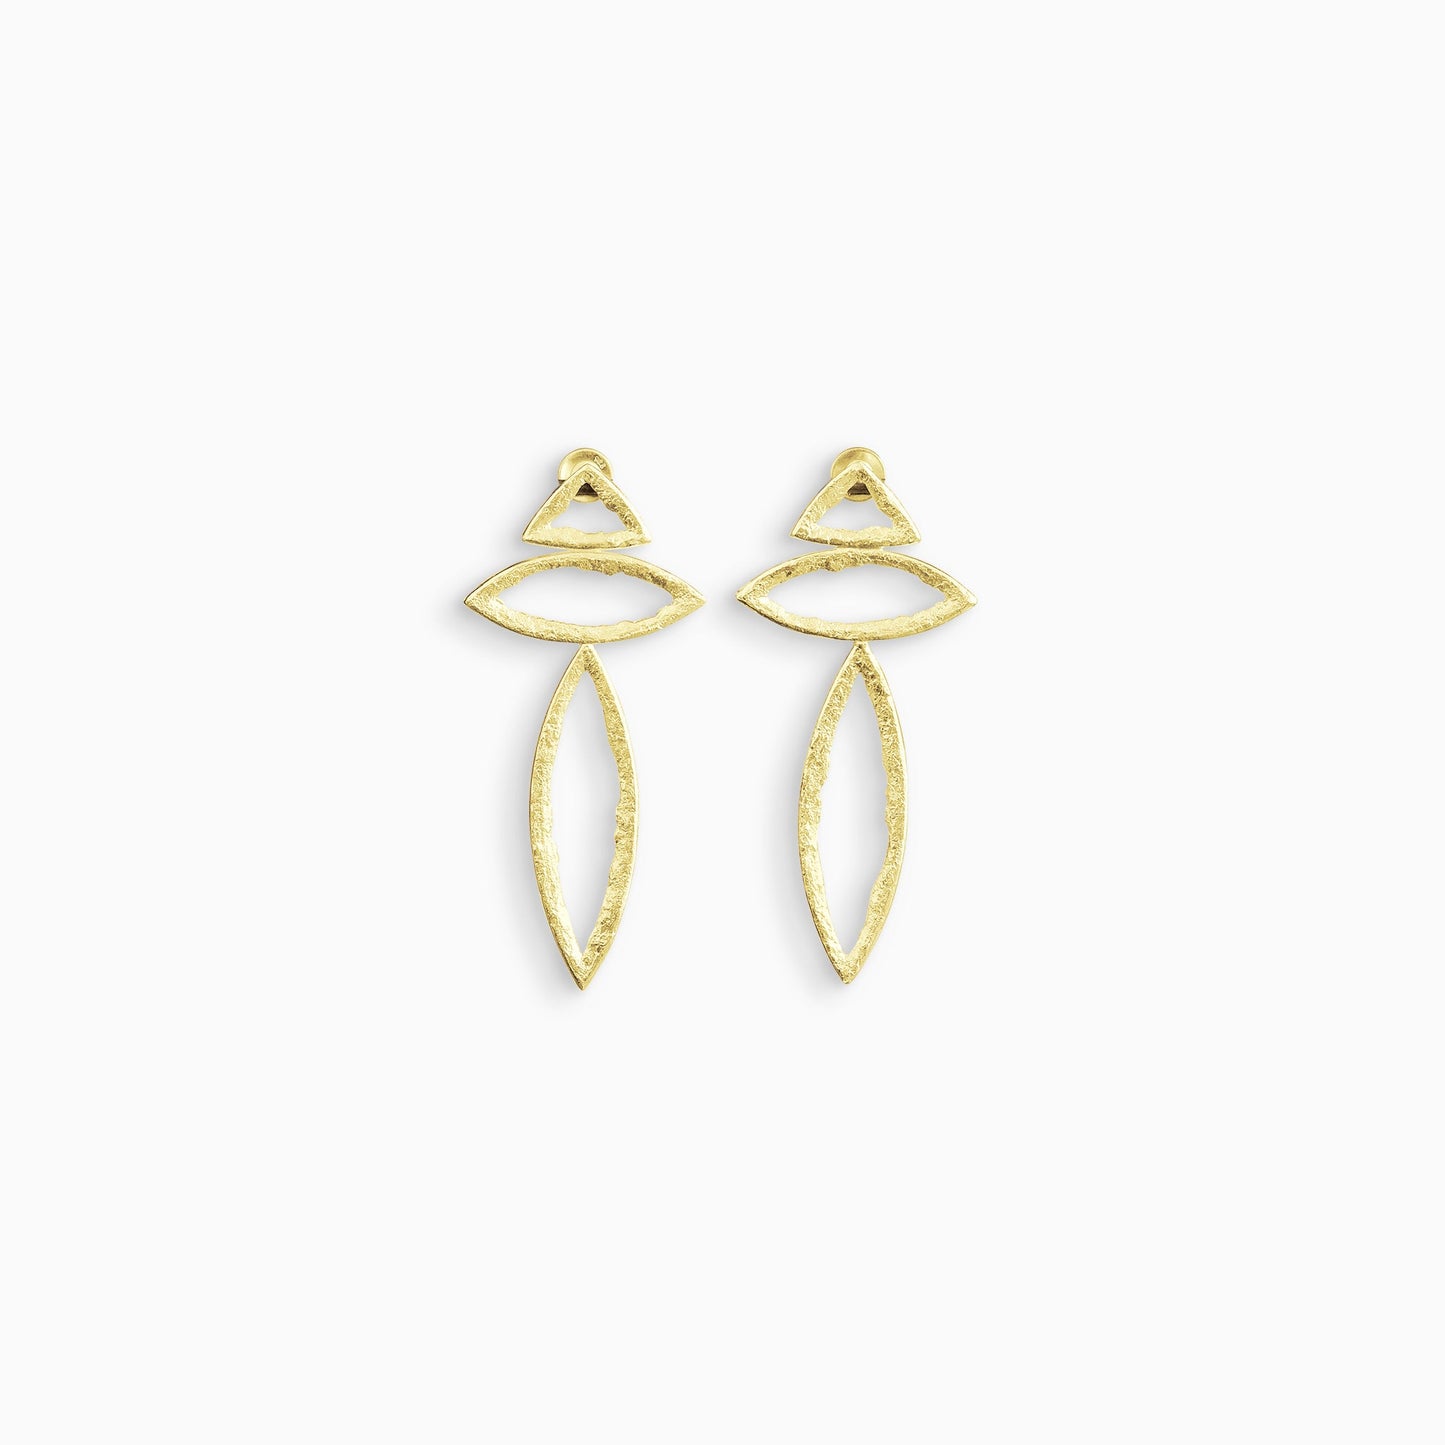 A pair of  18ct Fairtrade yellow gold drop earrings with a stud ear fitting. A small triangular shape connects to a small lozenge shape to a larger lozenge shape to form a line. These open strongly textured shapes have smooth outside edges and fragmented inside edges. 46mm x 26mm.